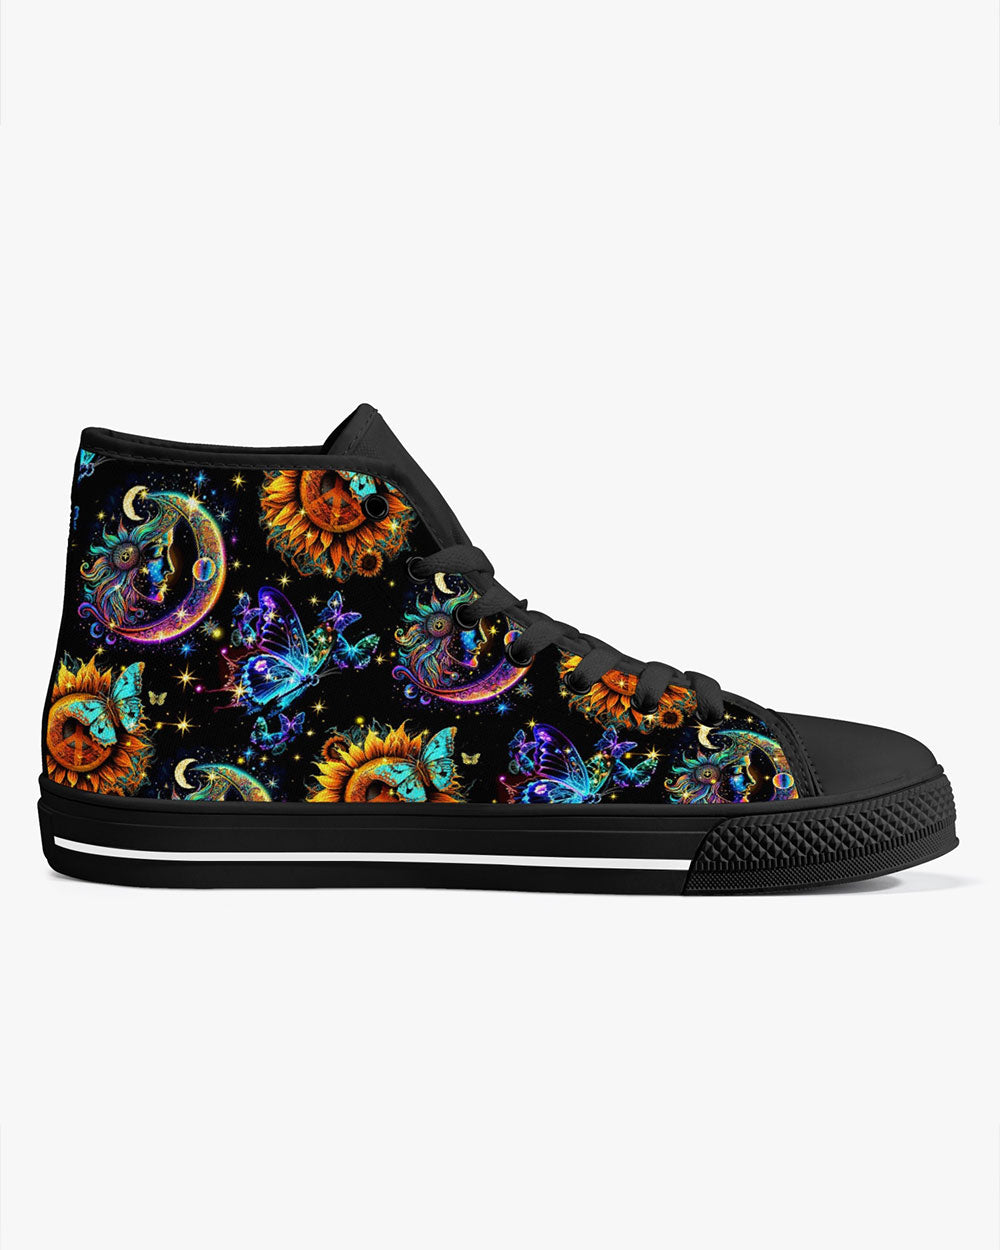 SPIRIT OF A FAIRY HIGH TOP CANVAS SHOES - TYTD2604236